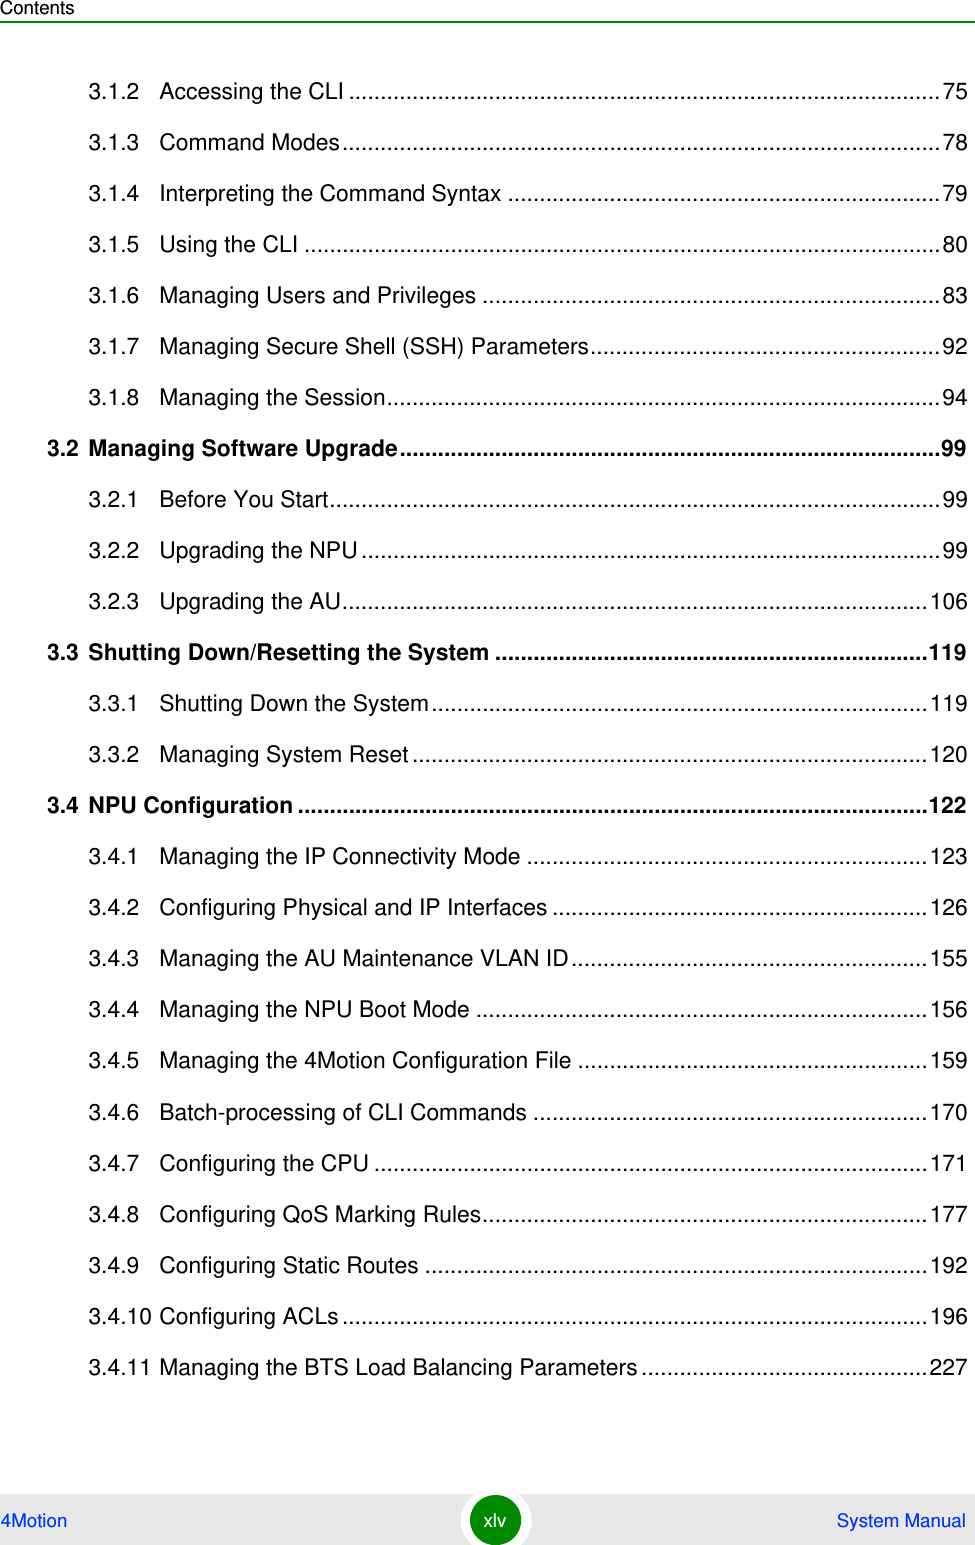 Contents4Motion xlv  System Manual3.1.2 Accessing the CLI .............................................................................................753.1.3 Command Modes..............................................................................................783.1.4 Interpreting the Command Syntax ....................................................................793.1.5 Using the CLI ....................................................................................................803.1.6 Managing Users and Privileges ........................................................................833.1.7 Managing Secure Shell (SSH) Parameters.......................................................923.1.8 Managing the Session.......................................................................................943.2 Managing Software Upgrade.....................................................................................993.2.1 Before You Start................................................................................................993.2.2 Upgrading the NPU ...........................................................................................993.2.3 Upgrading the AU............................................................................................1063.3 Shutting Down/Resetting the System ....................................................................1193.3.1 Shutting Down the System..............................................................................1193.3.2 Managing System Reset .................................................................................1203.4 NPU Configuration ...................................................................................................1223.4.1 Managing the IP Connectivity Mode ...............................................................1233.4.2 Configuring Physical and IP Interfaces ...........................................................1263.4.3 Managing the AU Maintenance VLAN ID........................................................1553.4.4 Managing the NPU Boot Mode .......................................................................1563.4.5 Managing the 4Motion Configuration File .......................................................1593.4.6 Batch-processing of CLI Commands ..............................................................1703.4.7 Configuring the CPU .......................................................................................1713.4.8 Configuring QoS Marking Rules......................................................................1773.4.9 Configuring Static Routes ...............................................................................1923.4.10 Configuring ACLs ............................................................................................1963.4.11 Managing the BTS Load Balancing Parameters .............................................227